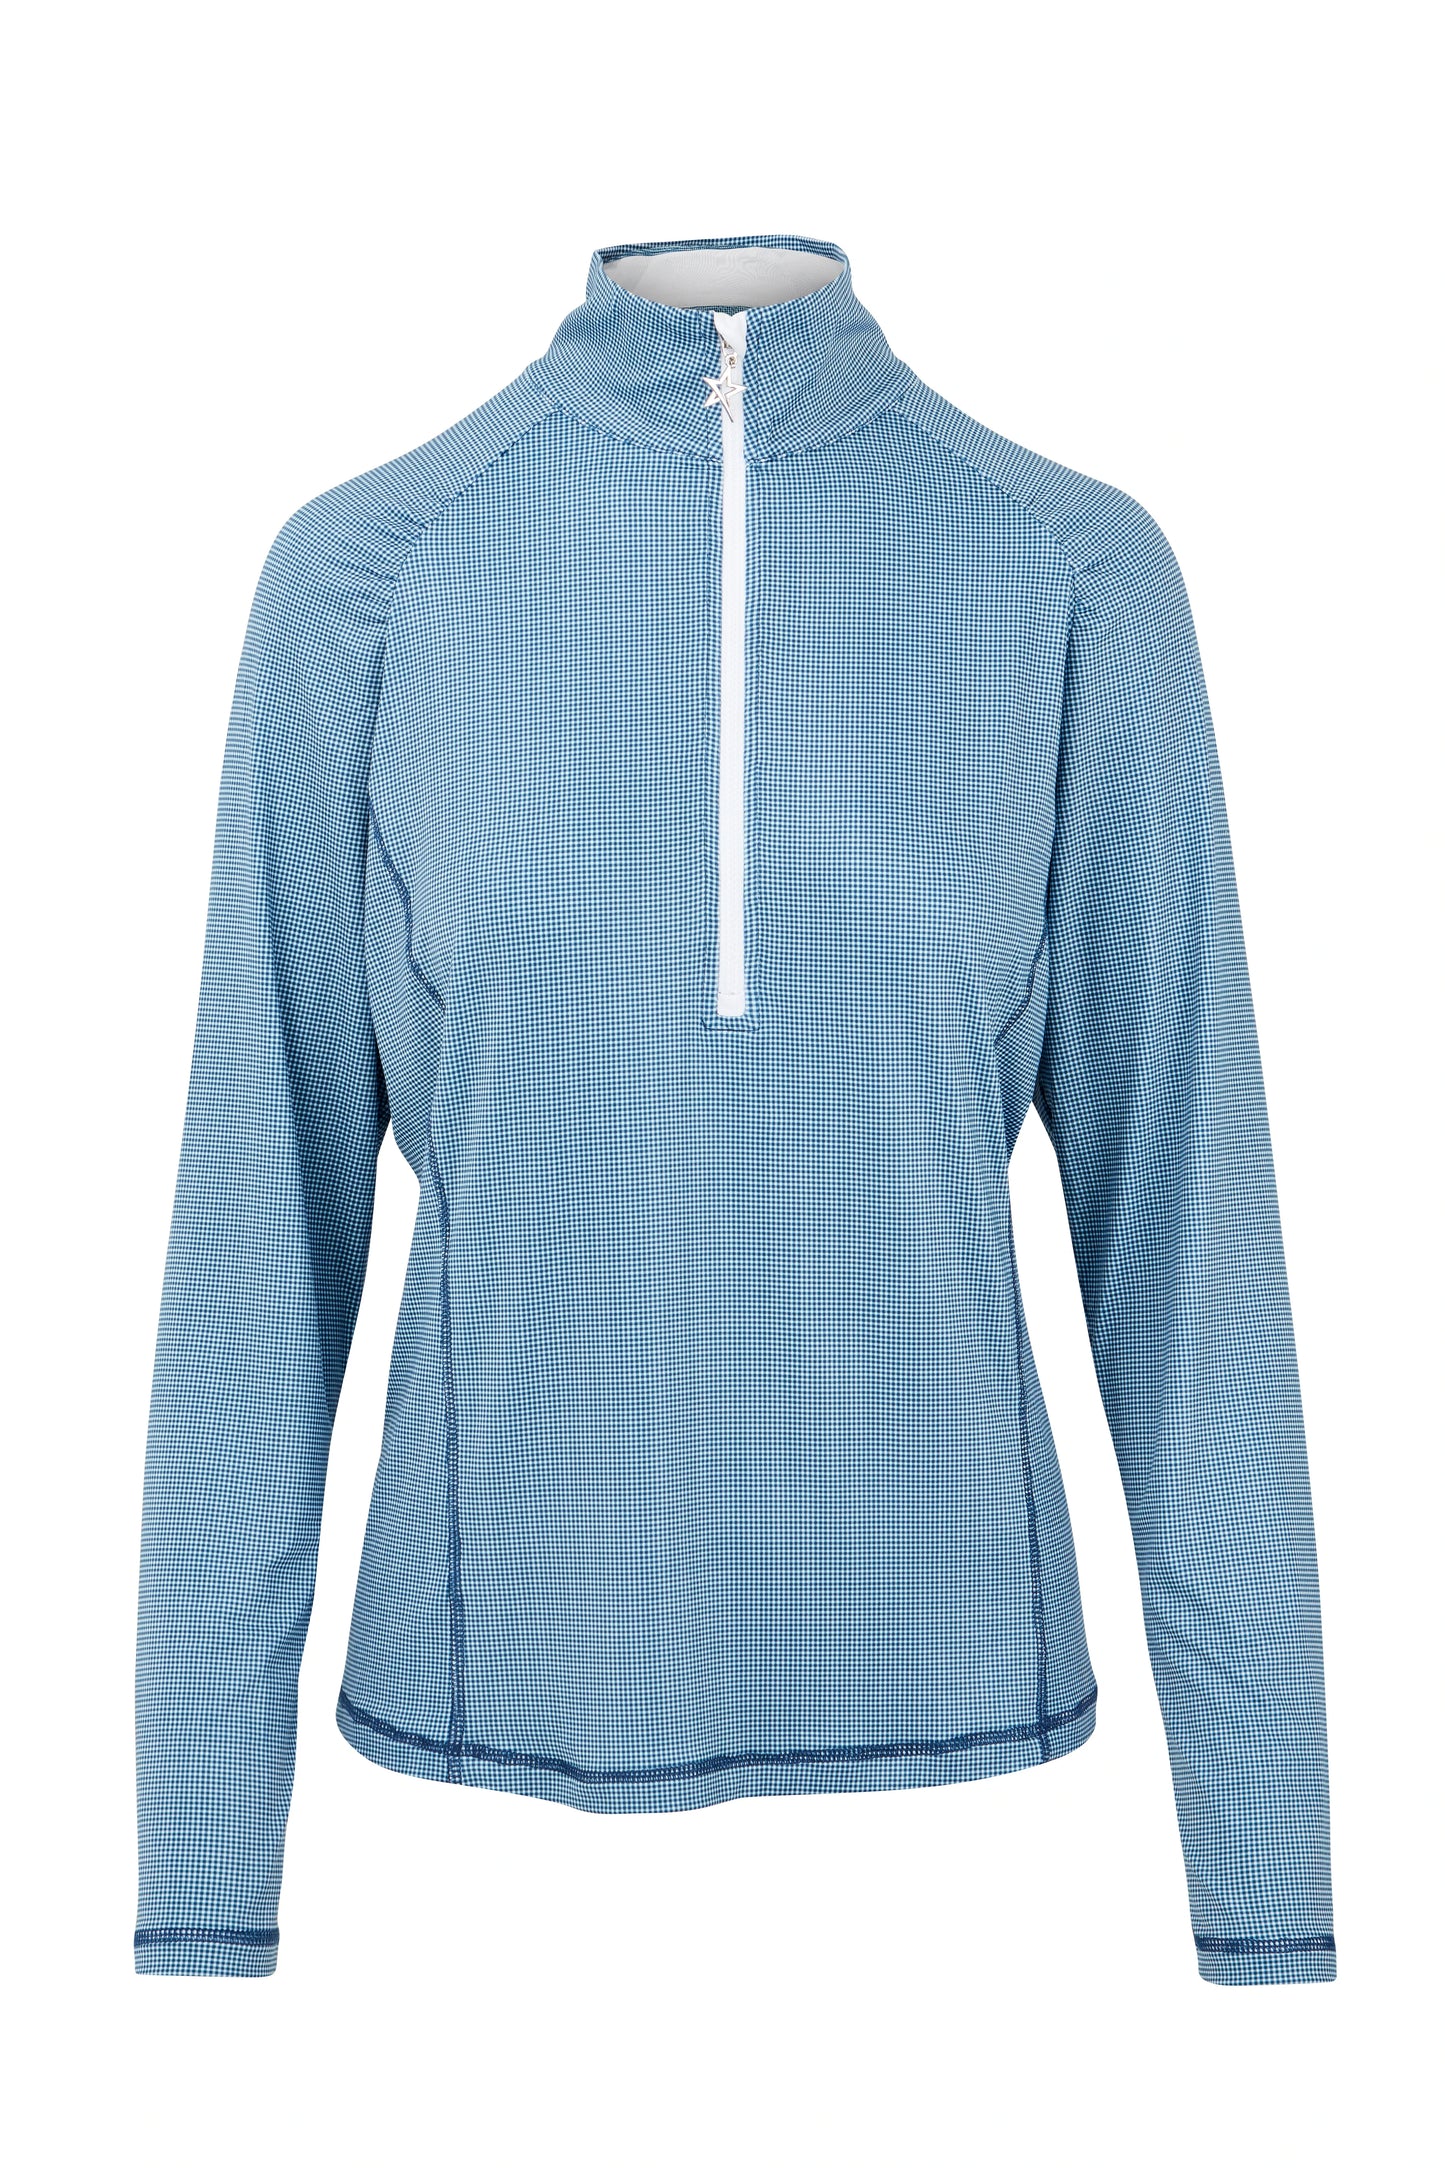 Swing Out Sister Celeste 1/4 Zip Mid Layer Top - Gingham